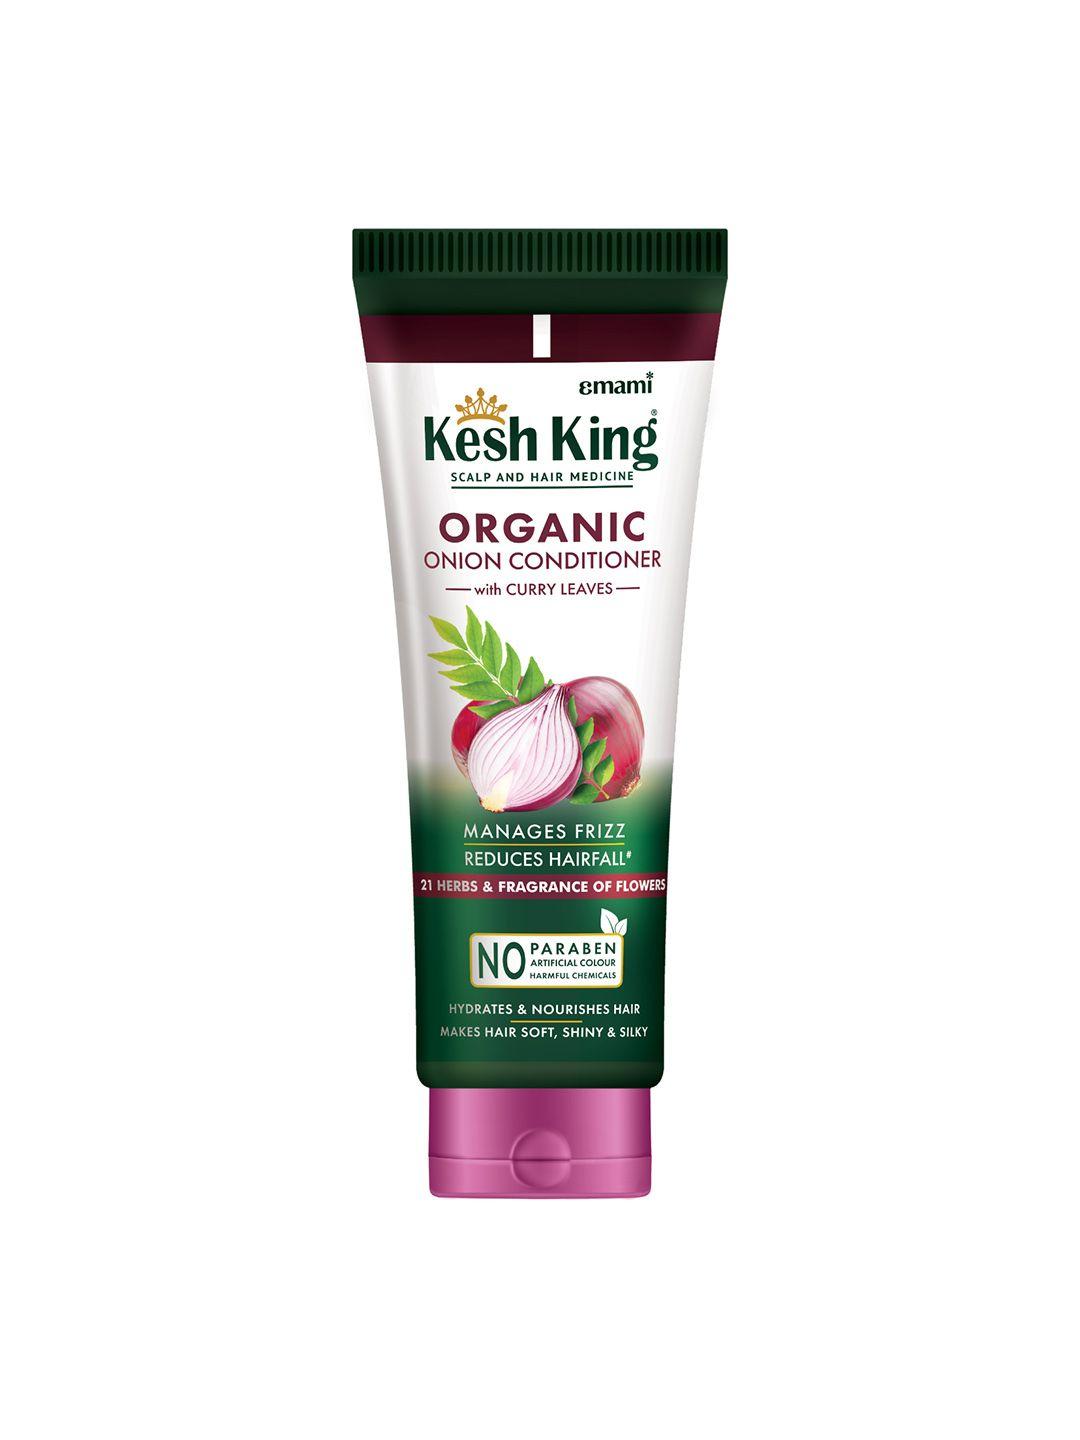 Kesh King Organic Onion Conditioner with Curry Leaves - 200 ml